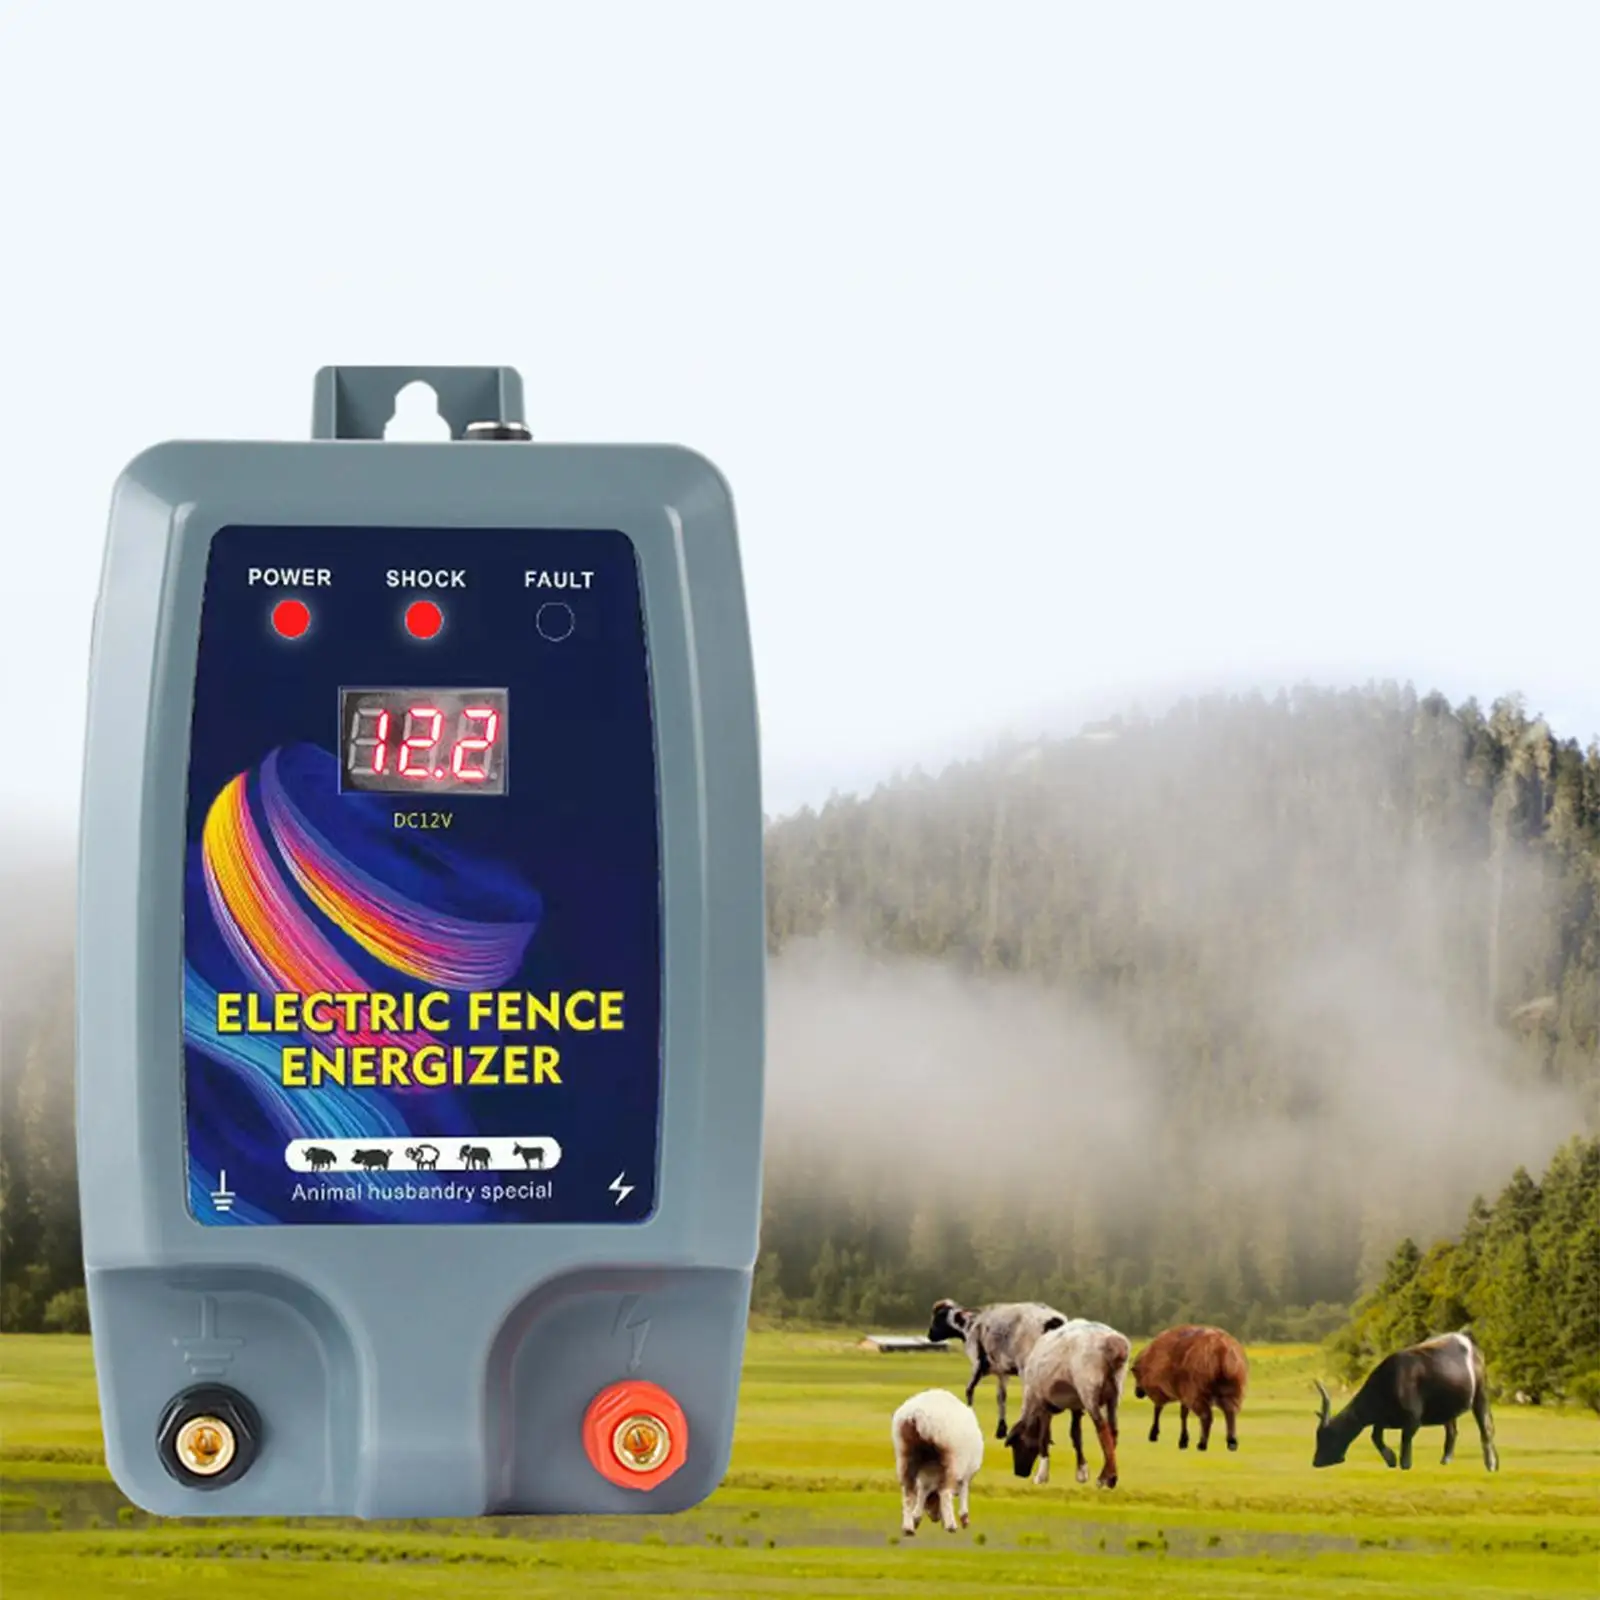 Electric Fence Energiser Controller High Voltage Pulse Waterproof Prevent Beasts for Livestock Fencing Supplies Poultry Fencing